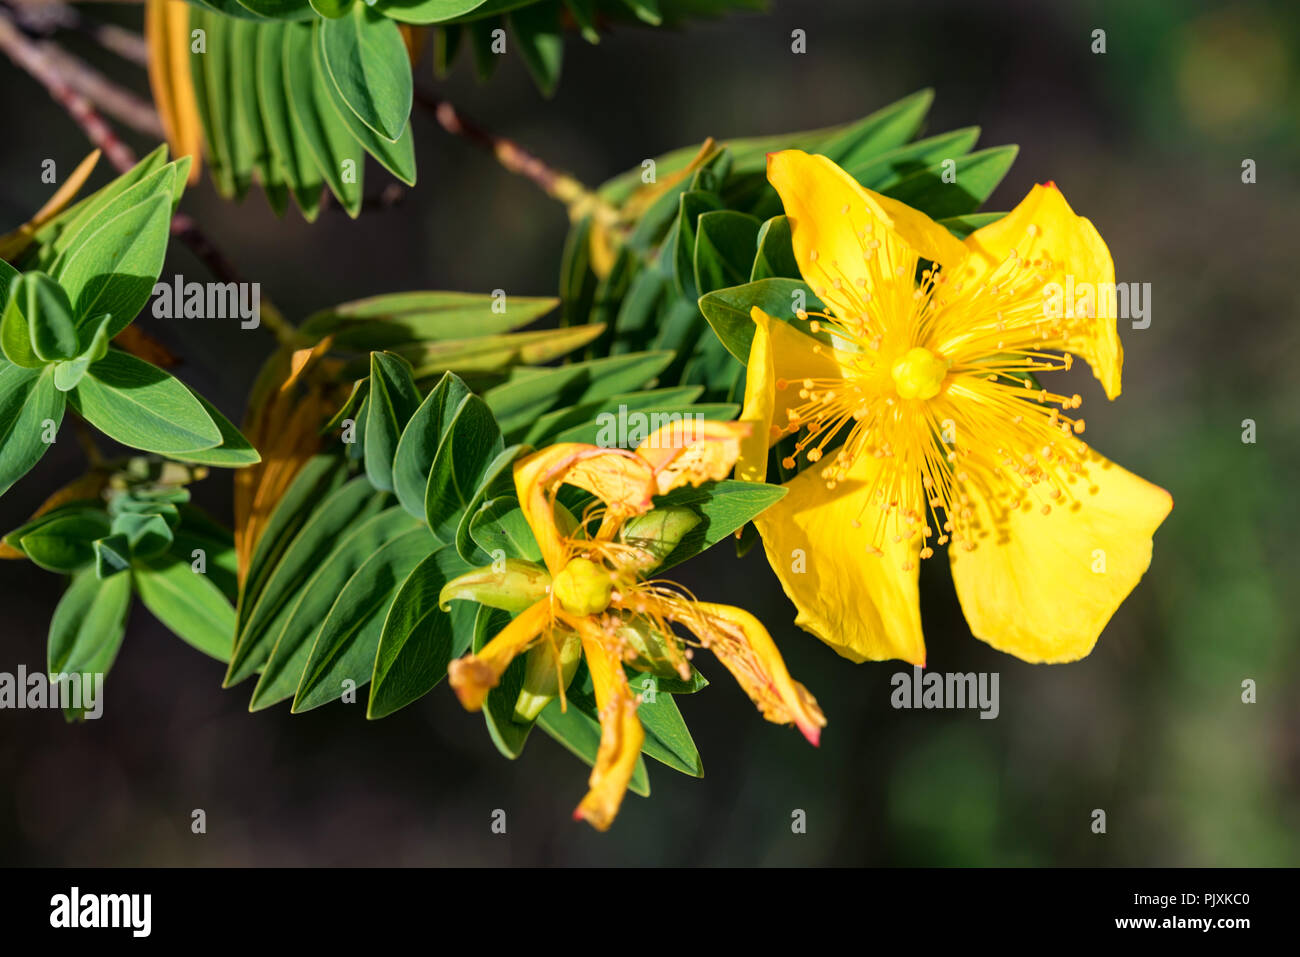 Green shrub of Genista with yellow flowers Stock Photo